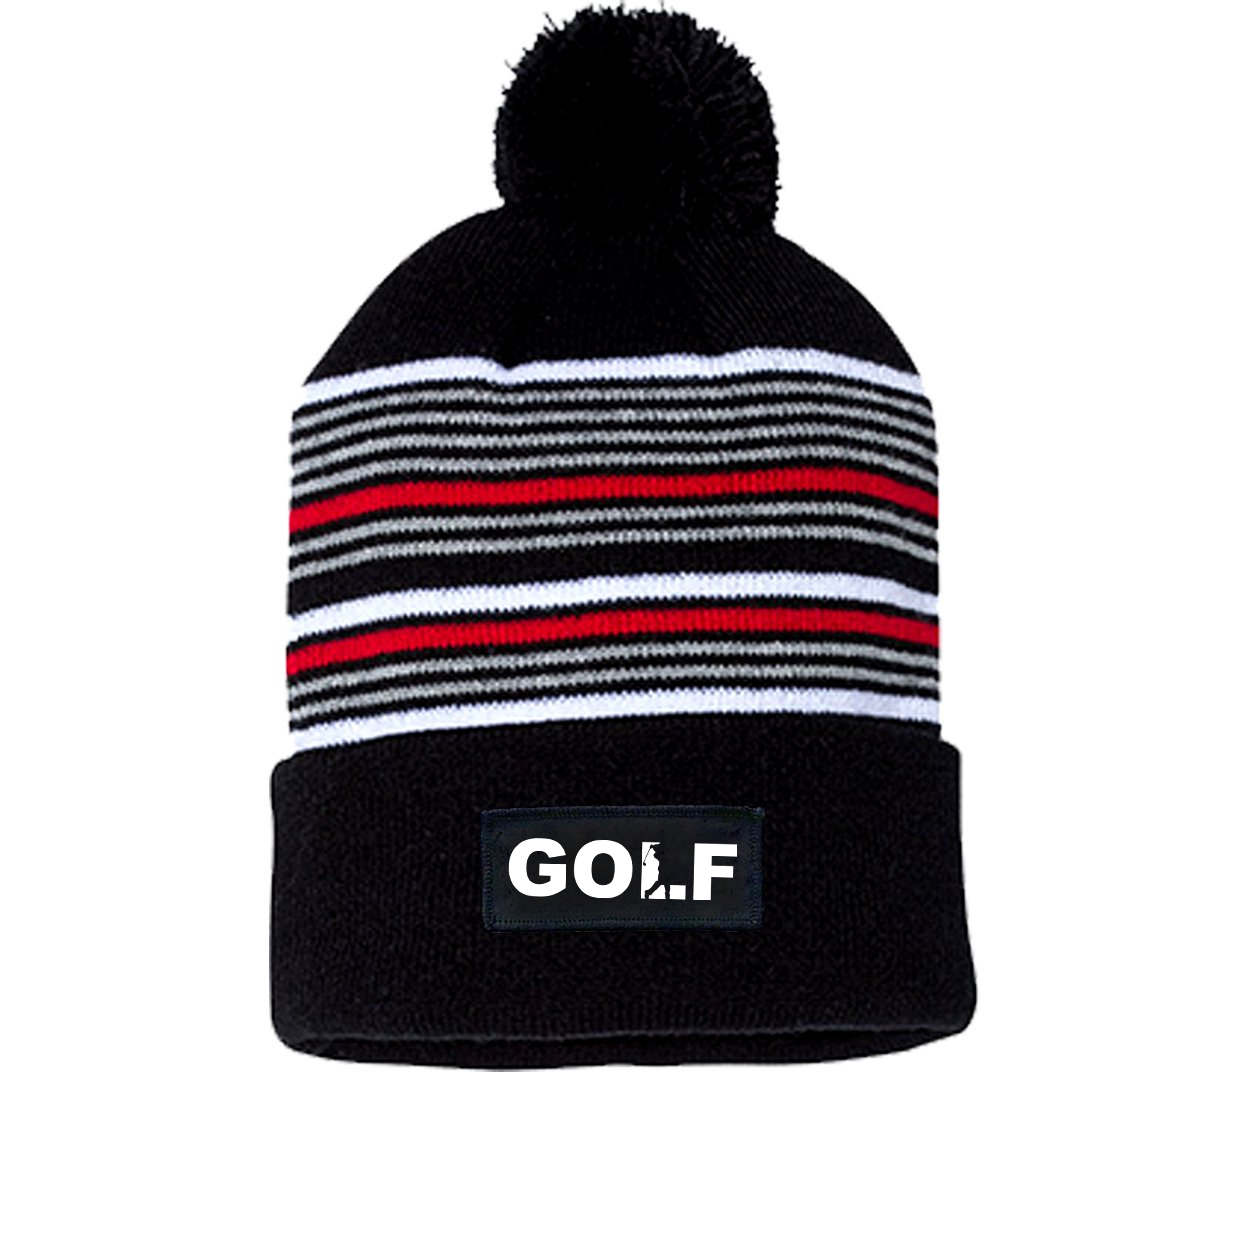 Golf Swing Logo Night Out Woven Patch Roll Up Pom Knit Beanie Black/ White/ Grey/ Red Beanie (White Logo)